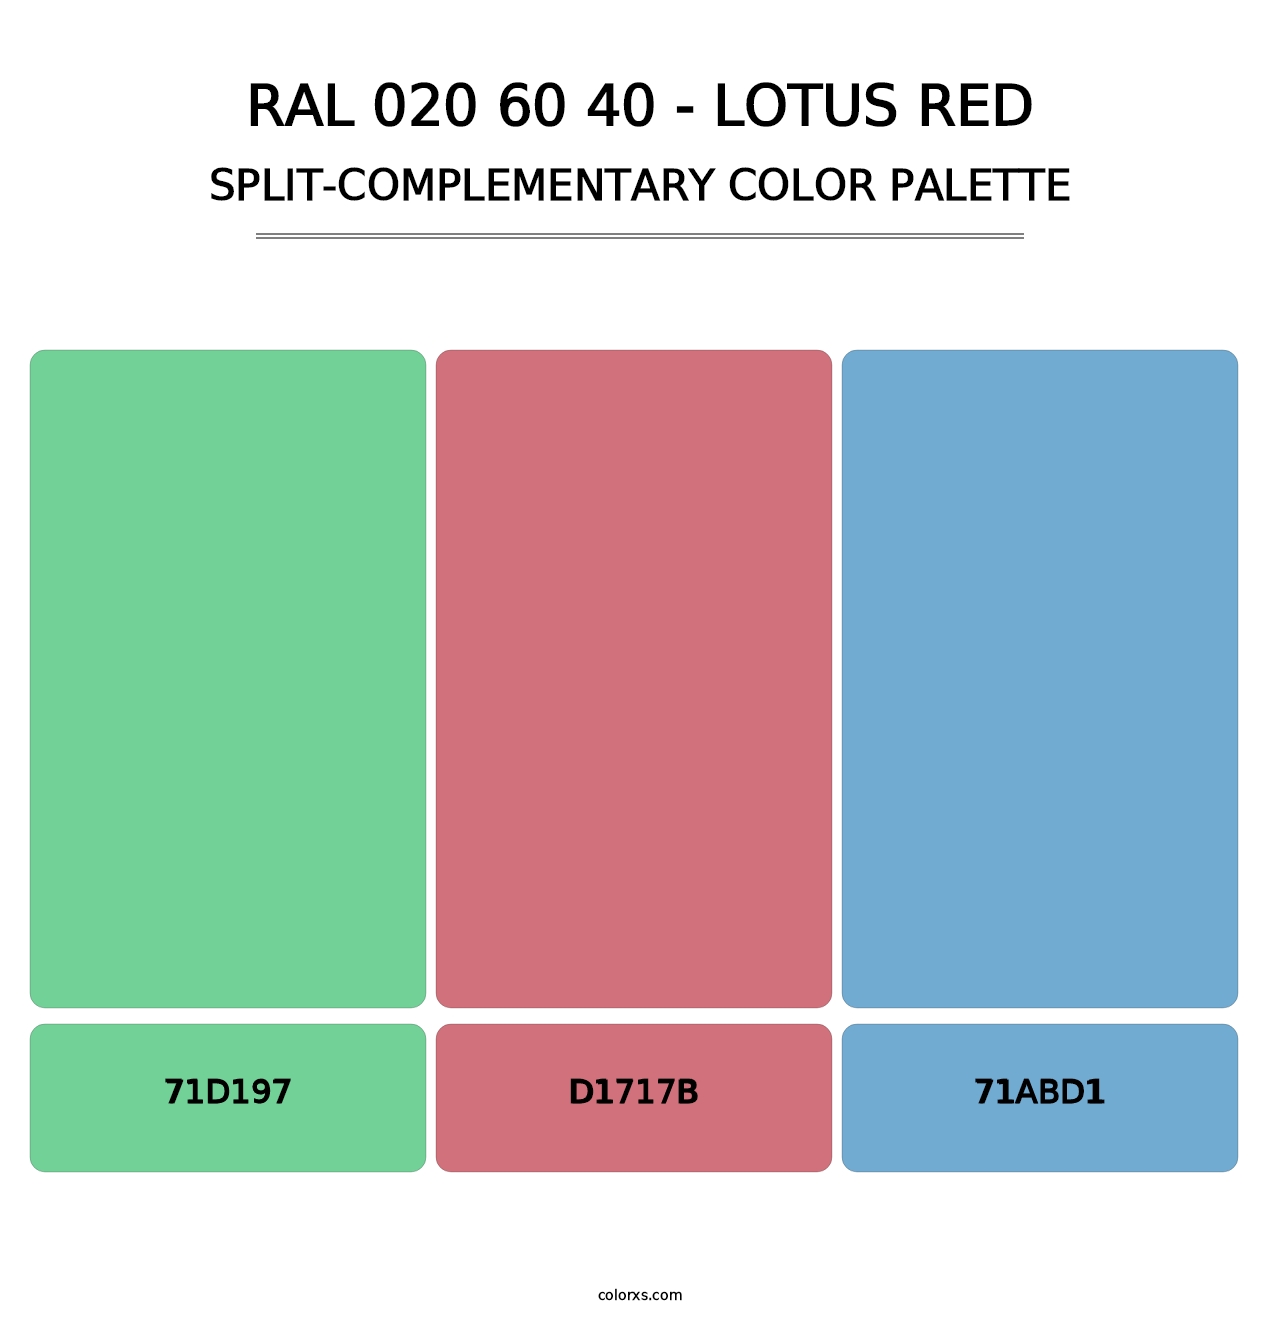 RAL 020 60 40 - Lotus Red - Split-Complementary Color Palette